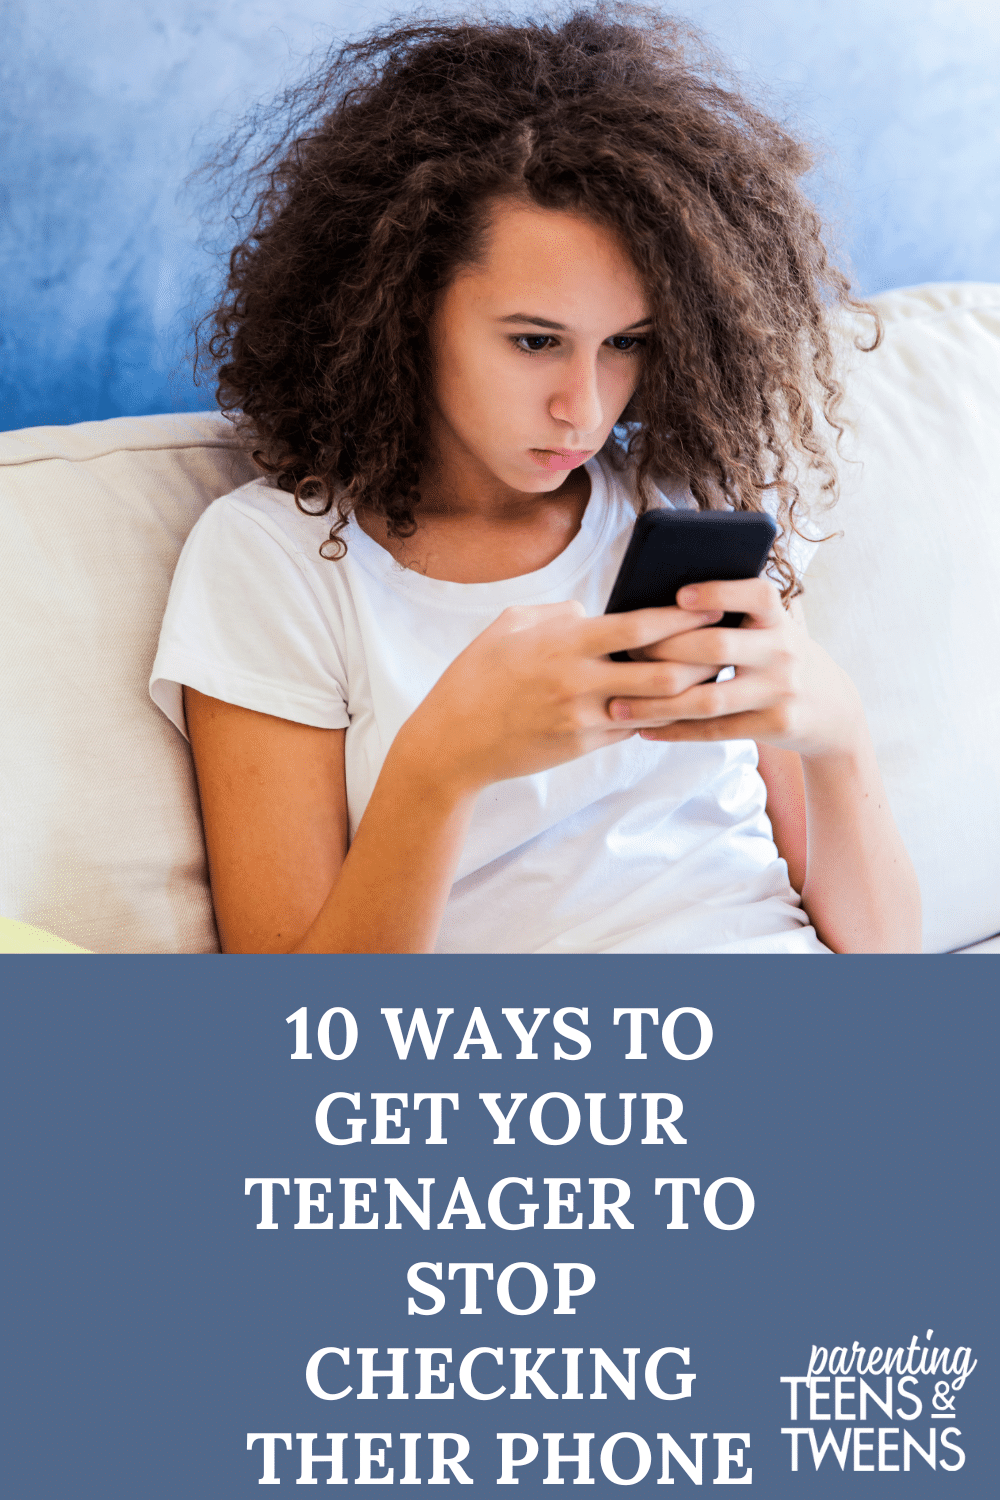 10 Ways to Get Your Teenager to Stop Checking Their Phone